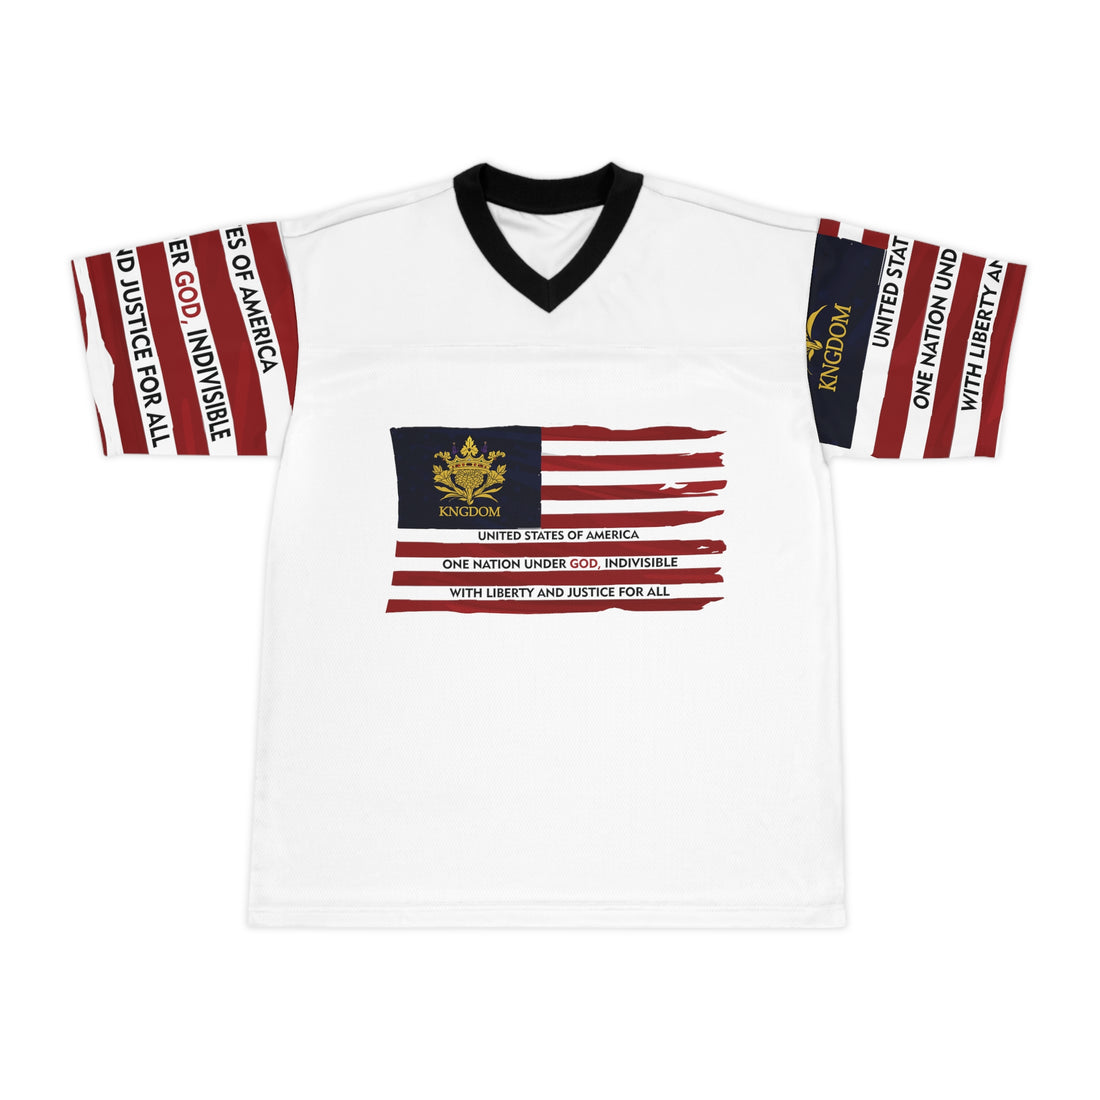 &quot;WE ARE AMERICA&quot;- Unisex Football Jersey/Backside Kngdom Logo